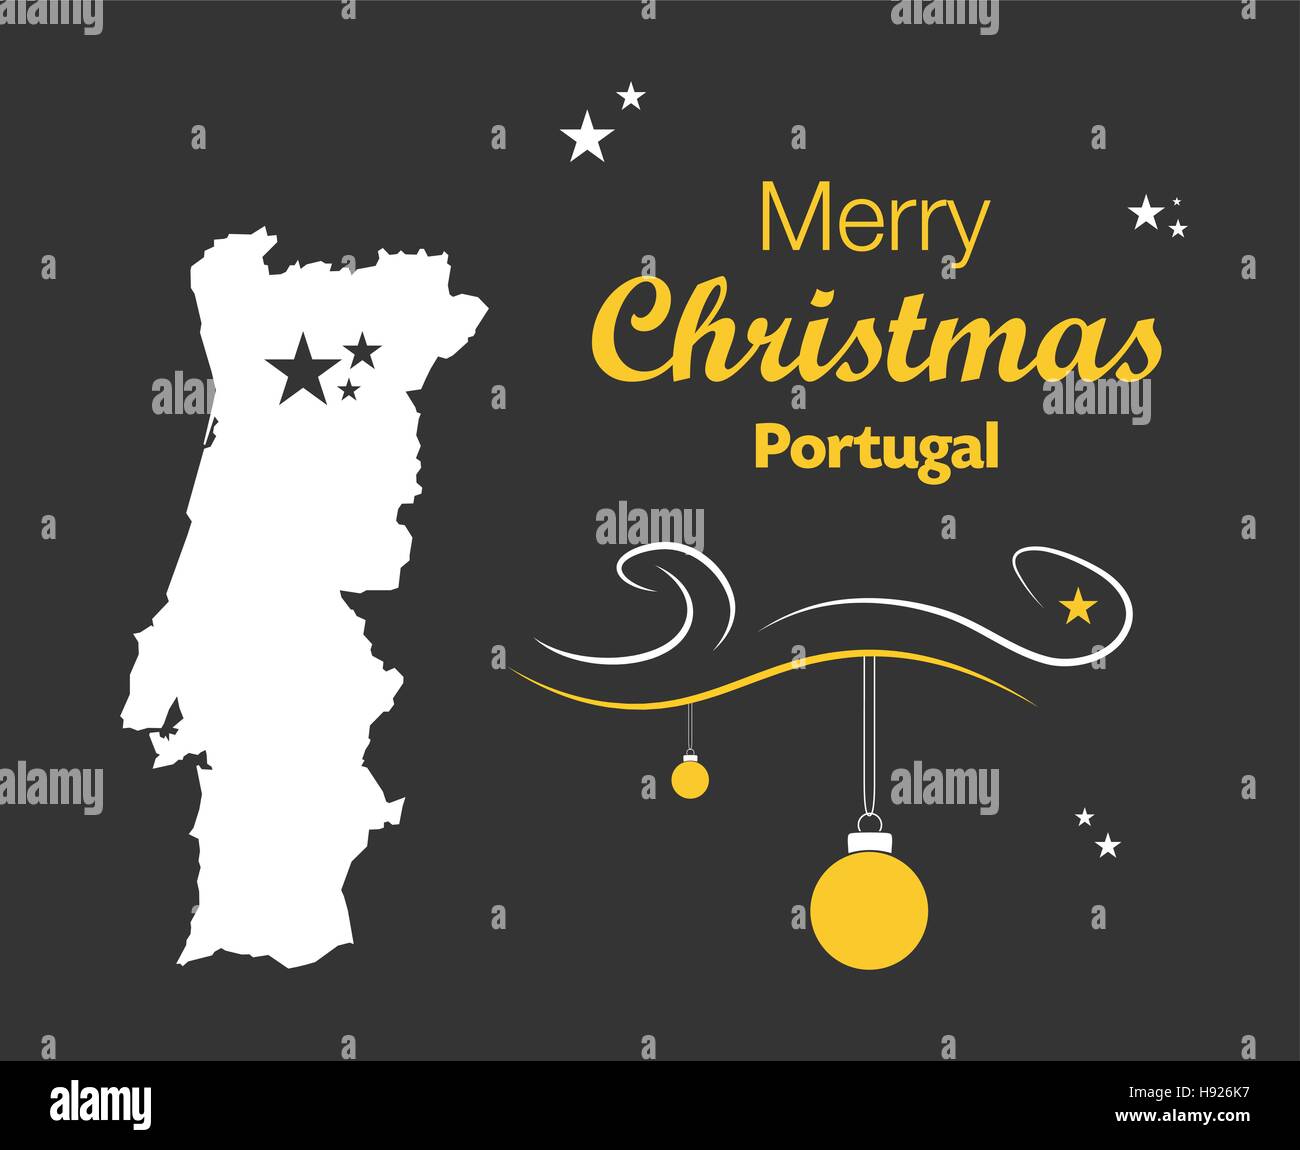 Merry Christmas illustration theme with map of Portugal Stock Vector